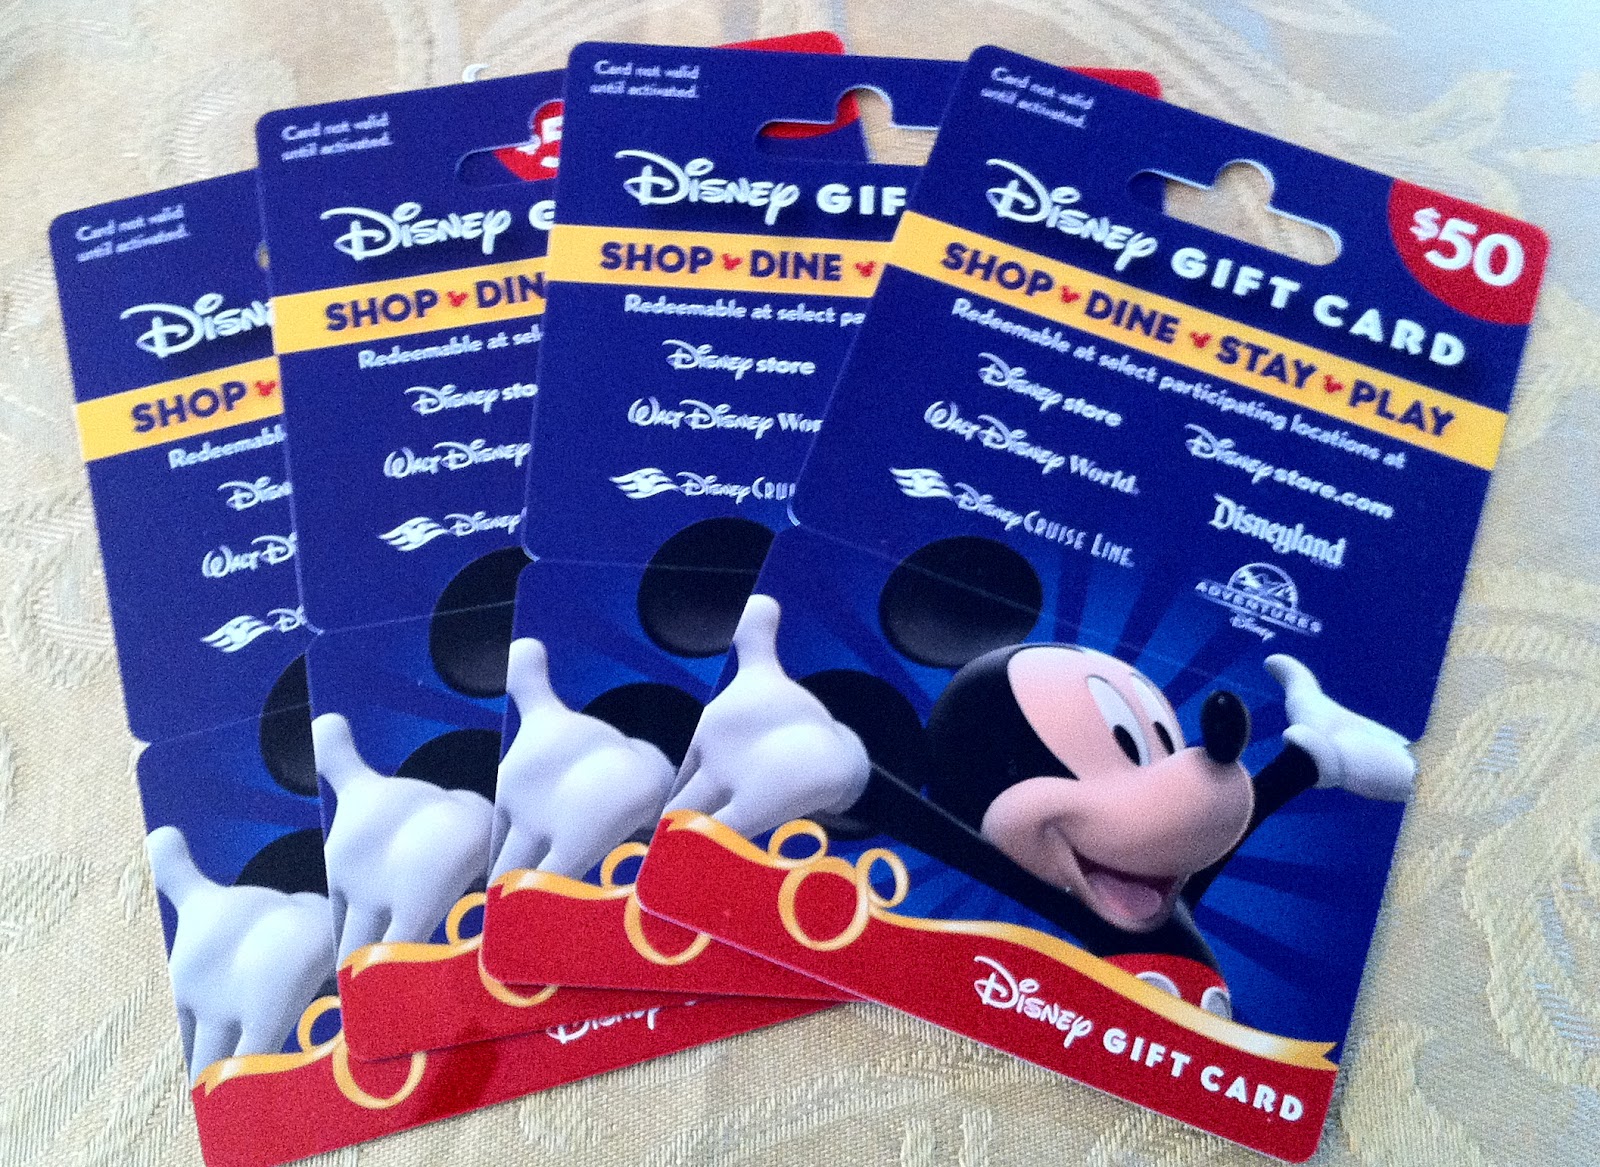 Lady In Wonderland: Save on Gas by buying Disney Gift Cards